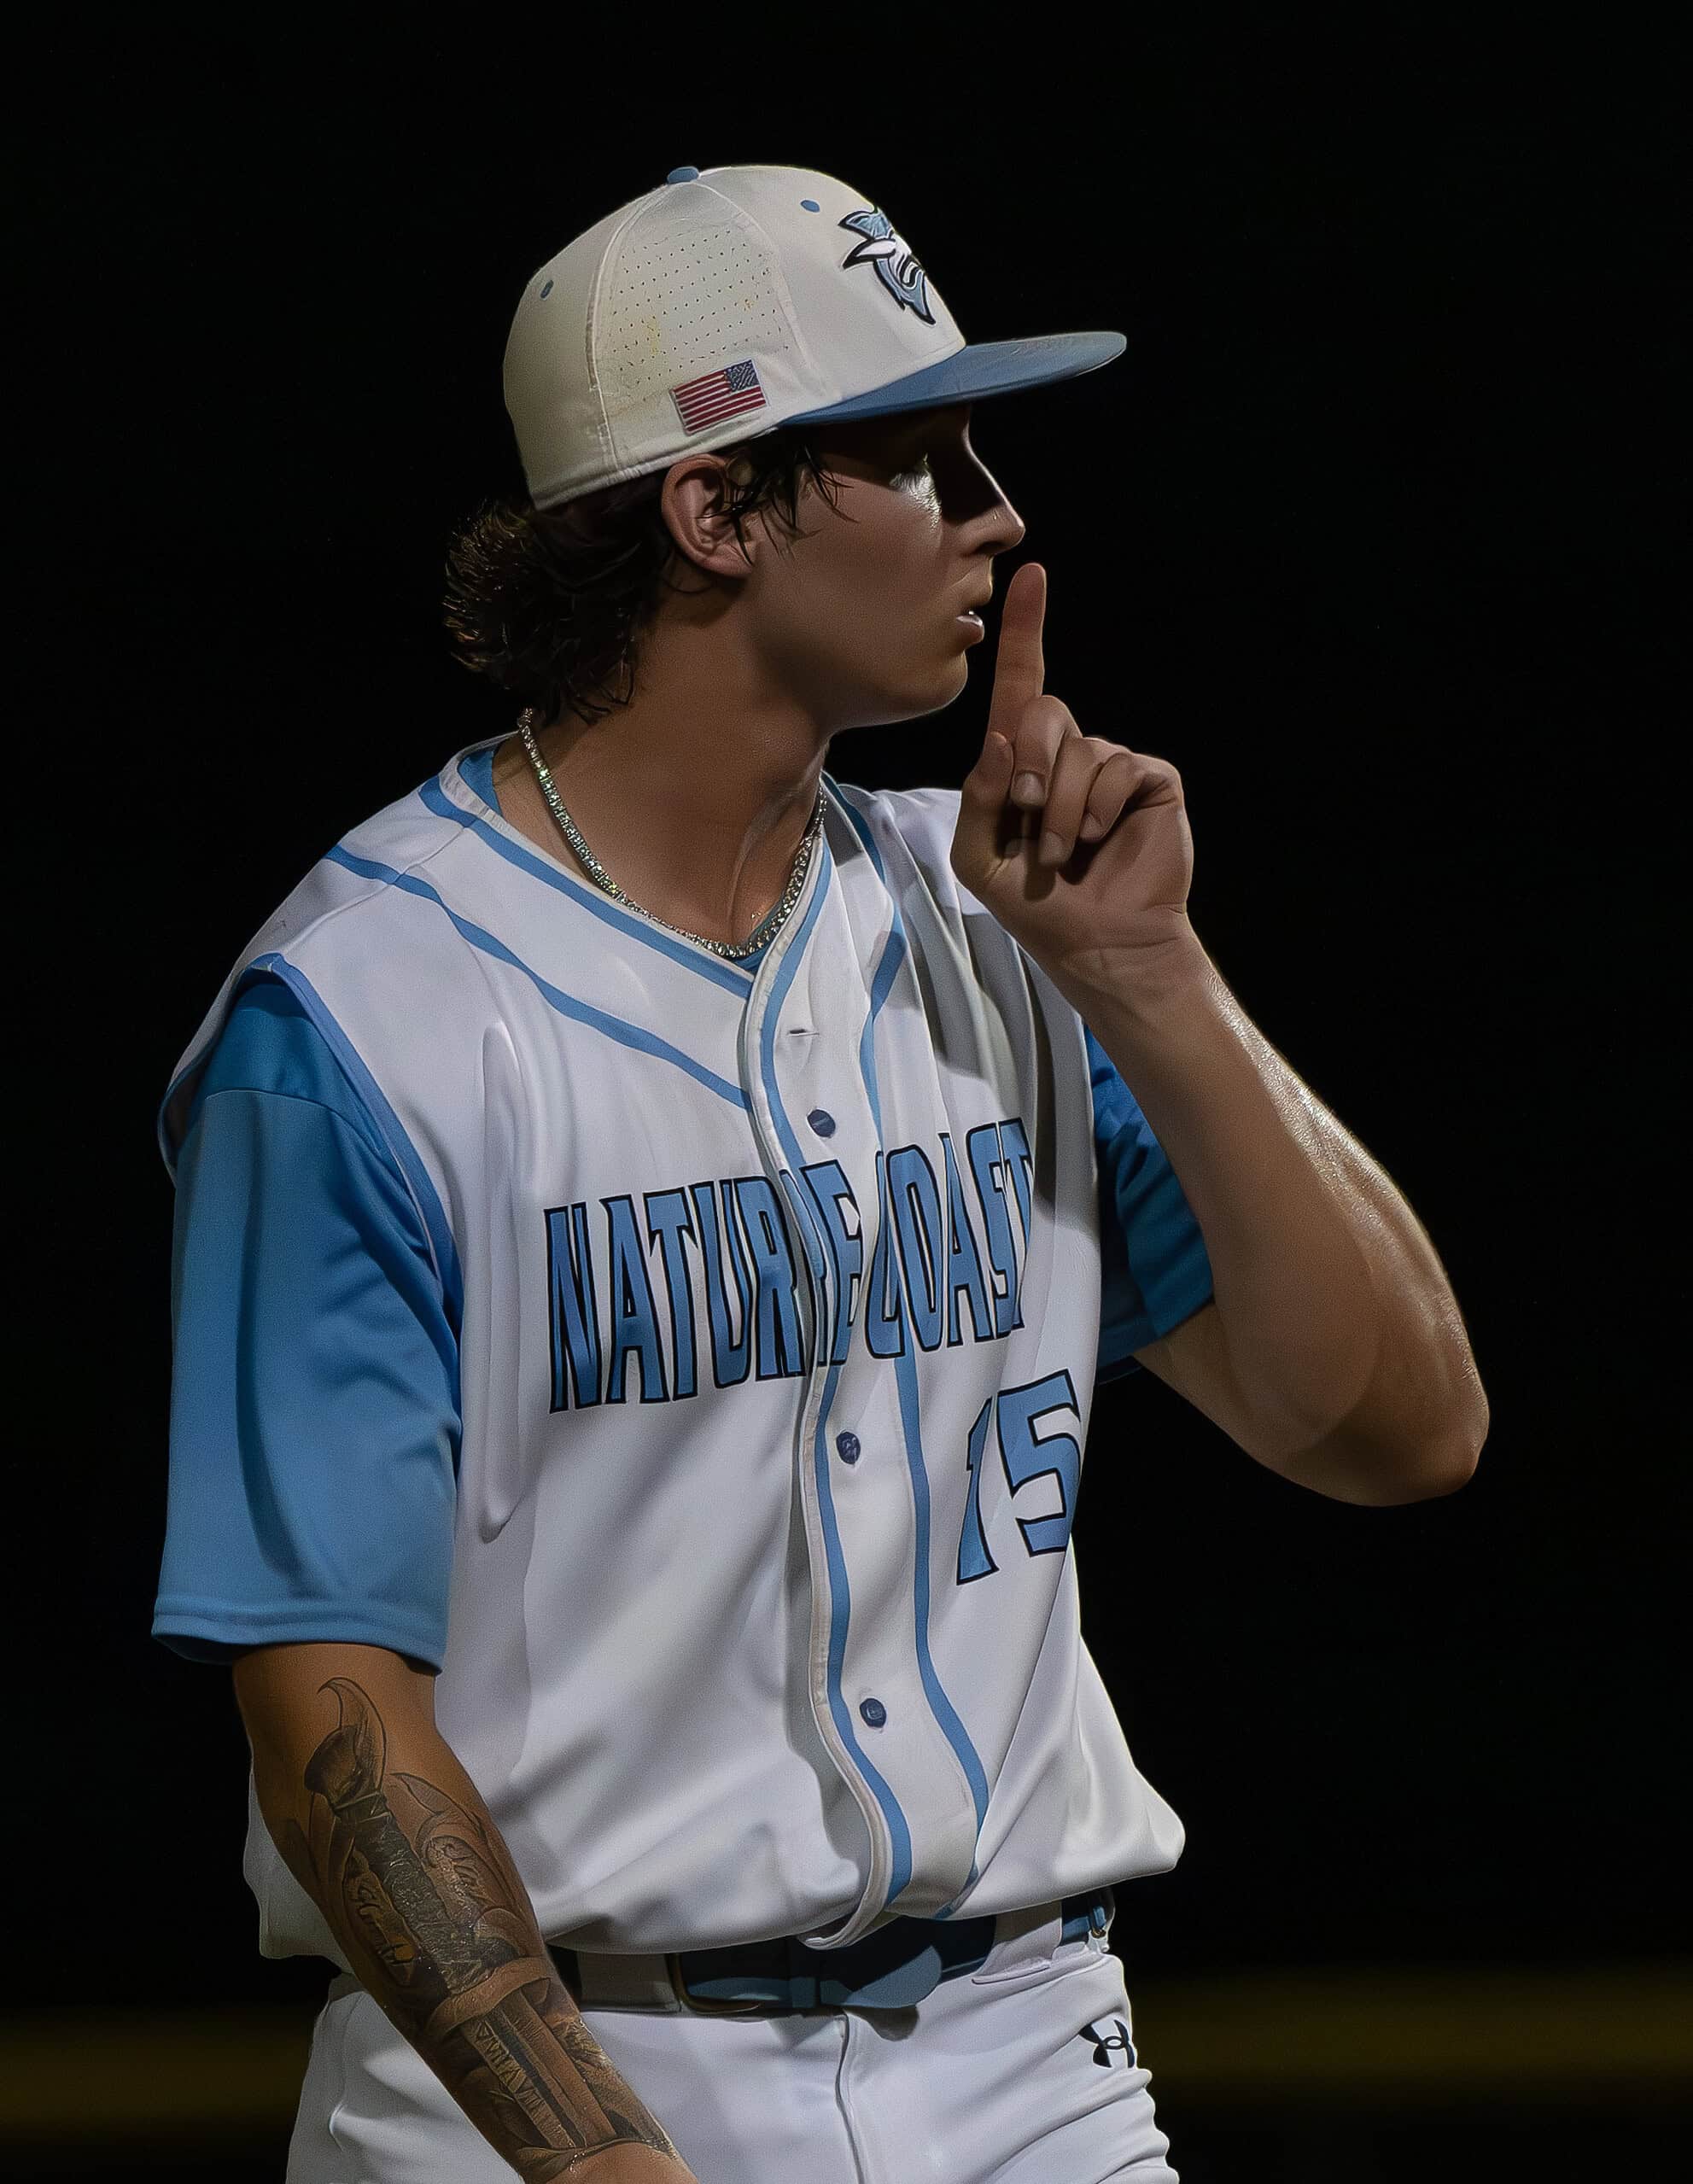 Nature Coast Tech pitcher, 15, Jackson Hoyt silenced the Satellite High bats and the visiting crowd in the 5-1 NCT win in the 4A Regional Quarterfinal game. Photo by [Joseph Dicristofalo]